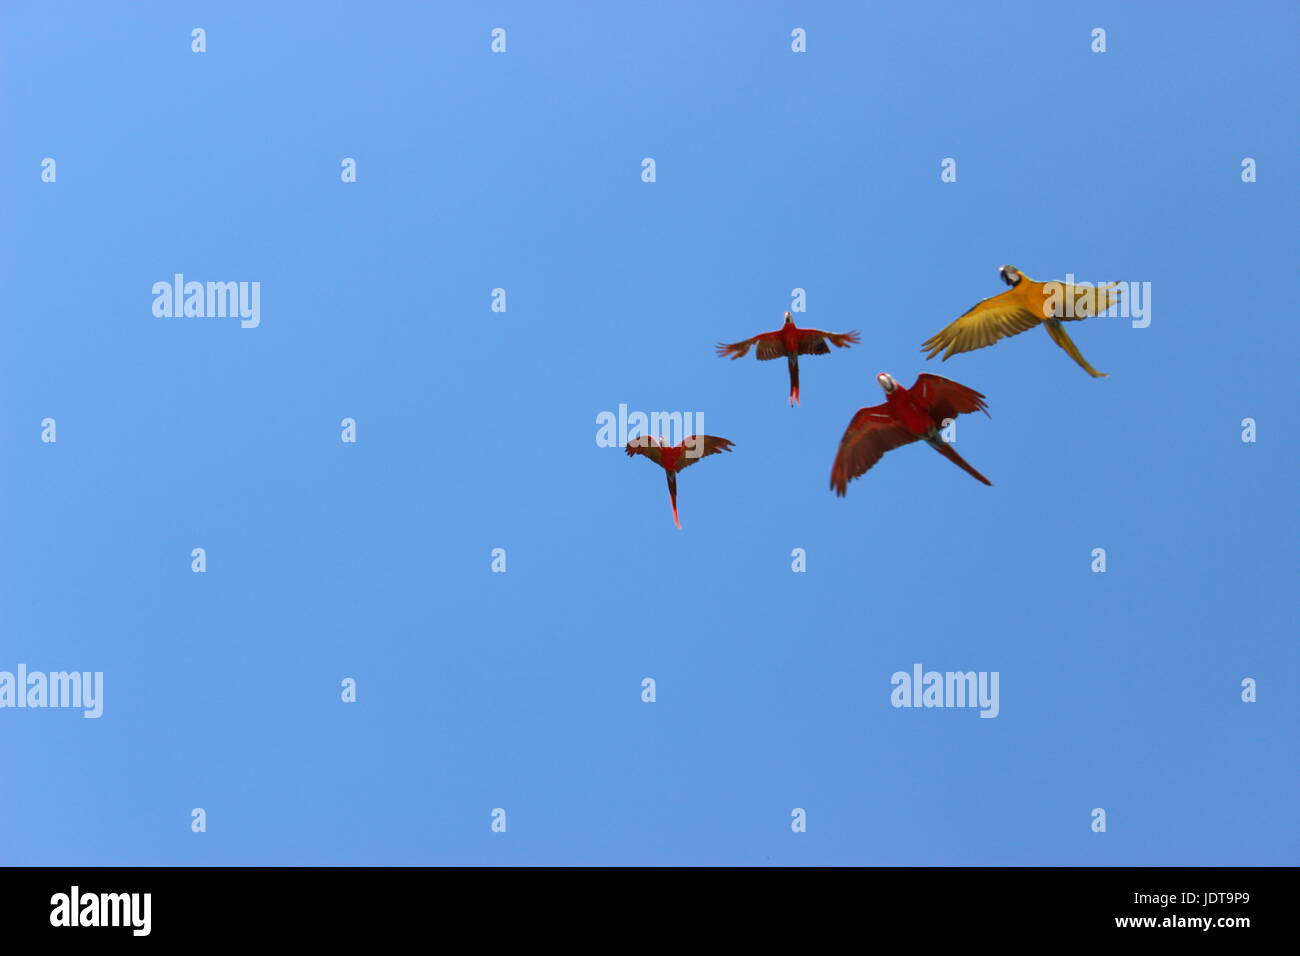 Some colorful birds in a bright blue sky Stock Photo